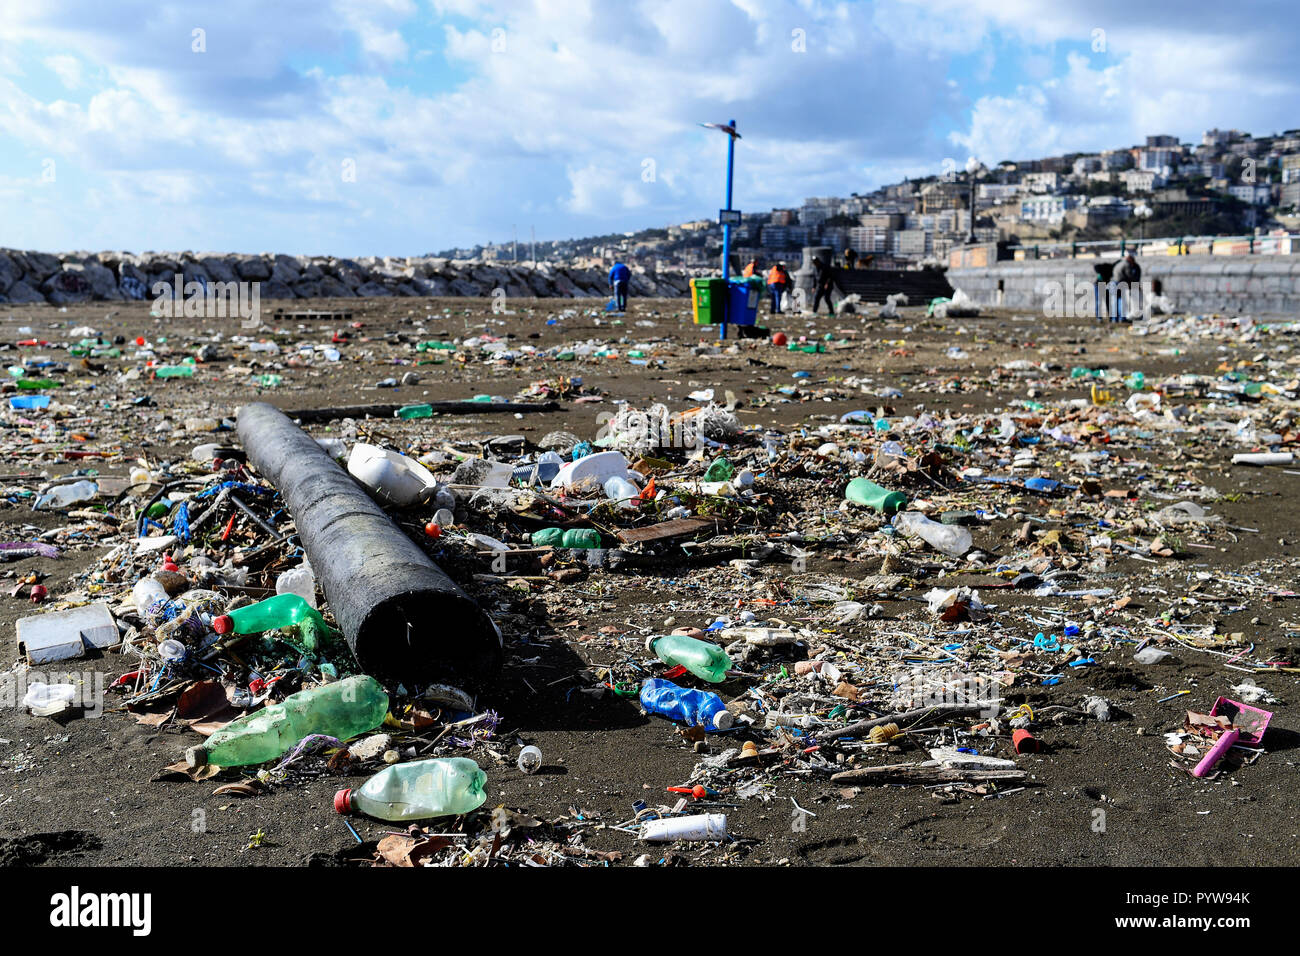 naples-italy-30th-october-2018-naples-beach-of-the-diaz-roundabout-this-morning-after-the-storm-filled-with-bottles-and-plastic-objects-30102018-naples-italy-credit-independent-photo-agency-srlalamy-live-news-PYW94K.jpg